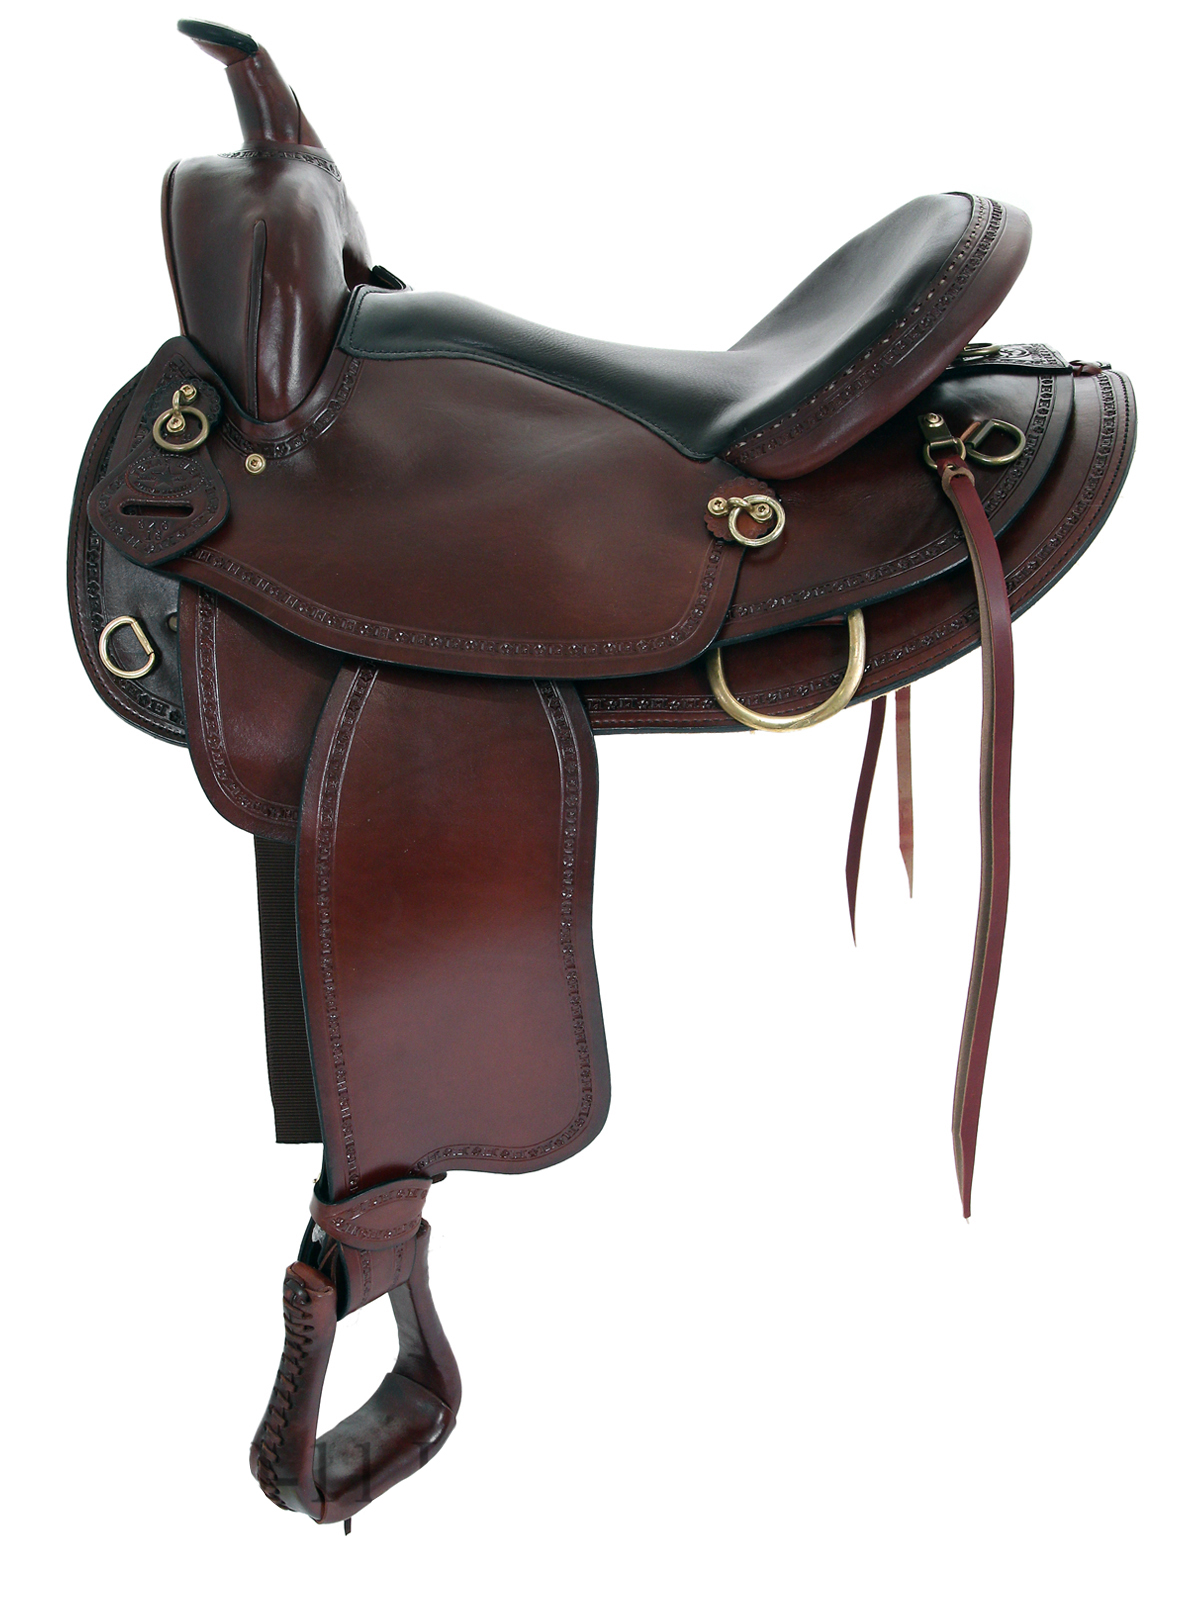 16inch 17inch Big Horn Texas Best Hill Country Trail II Saddle